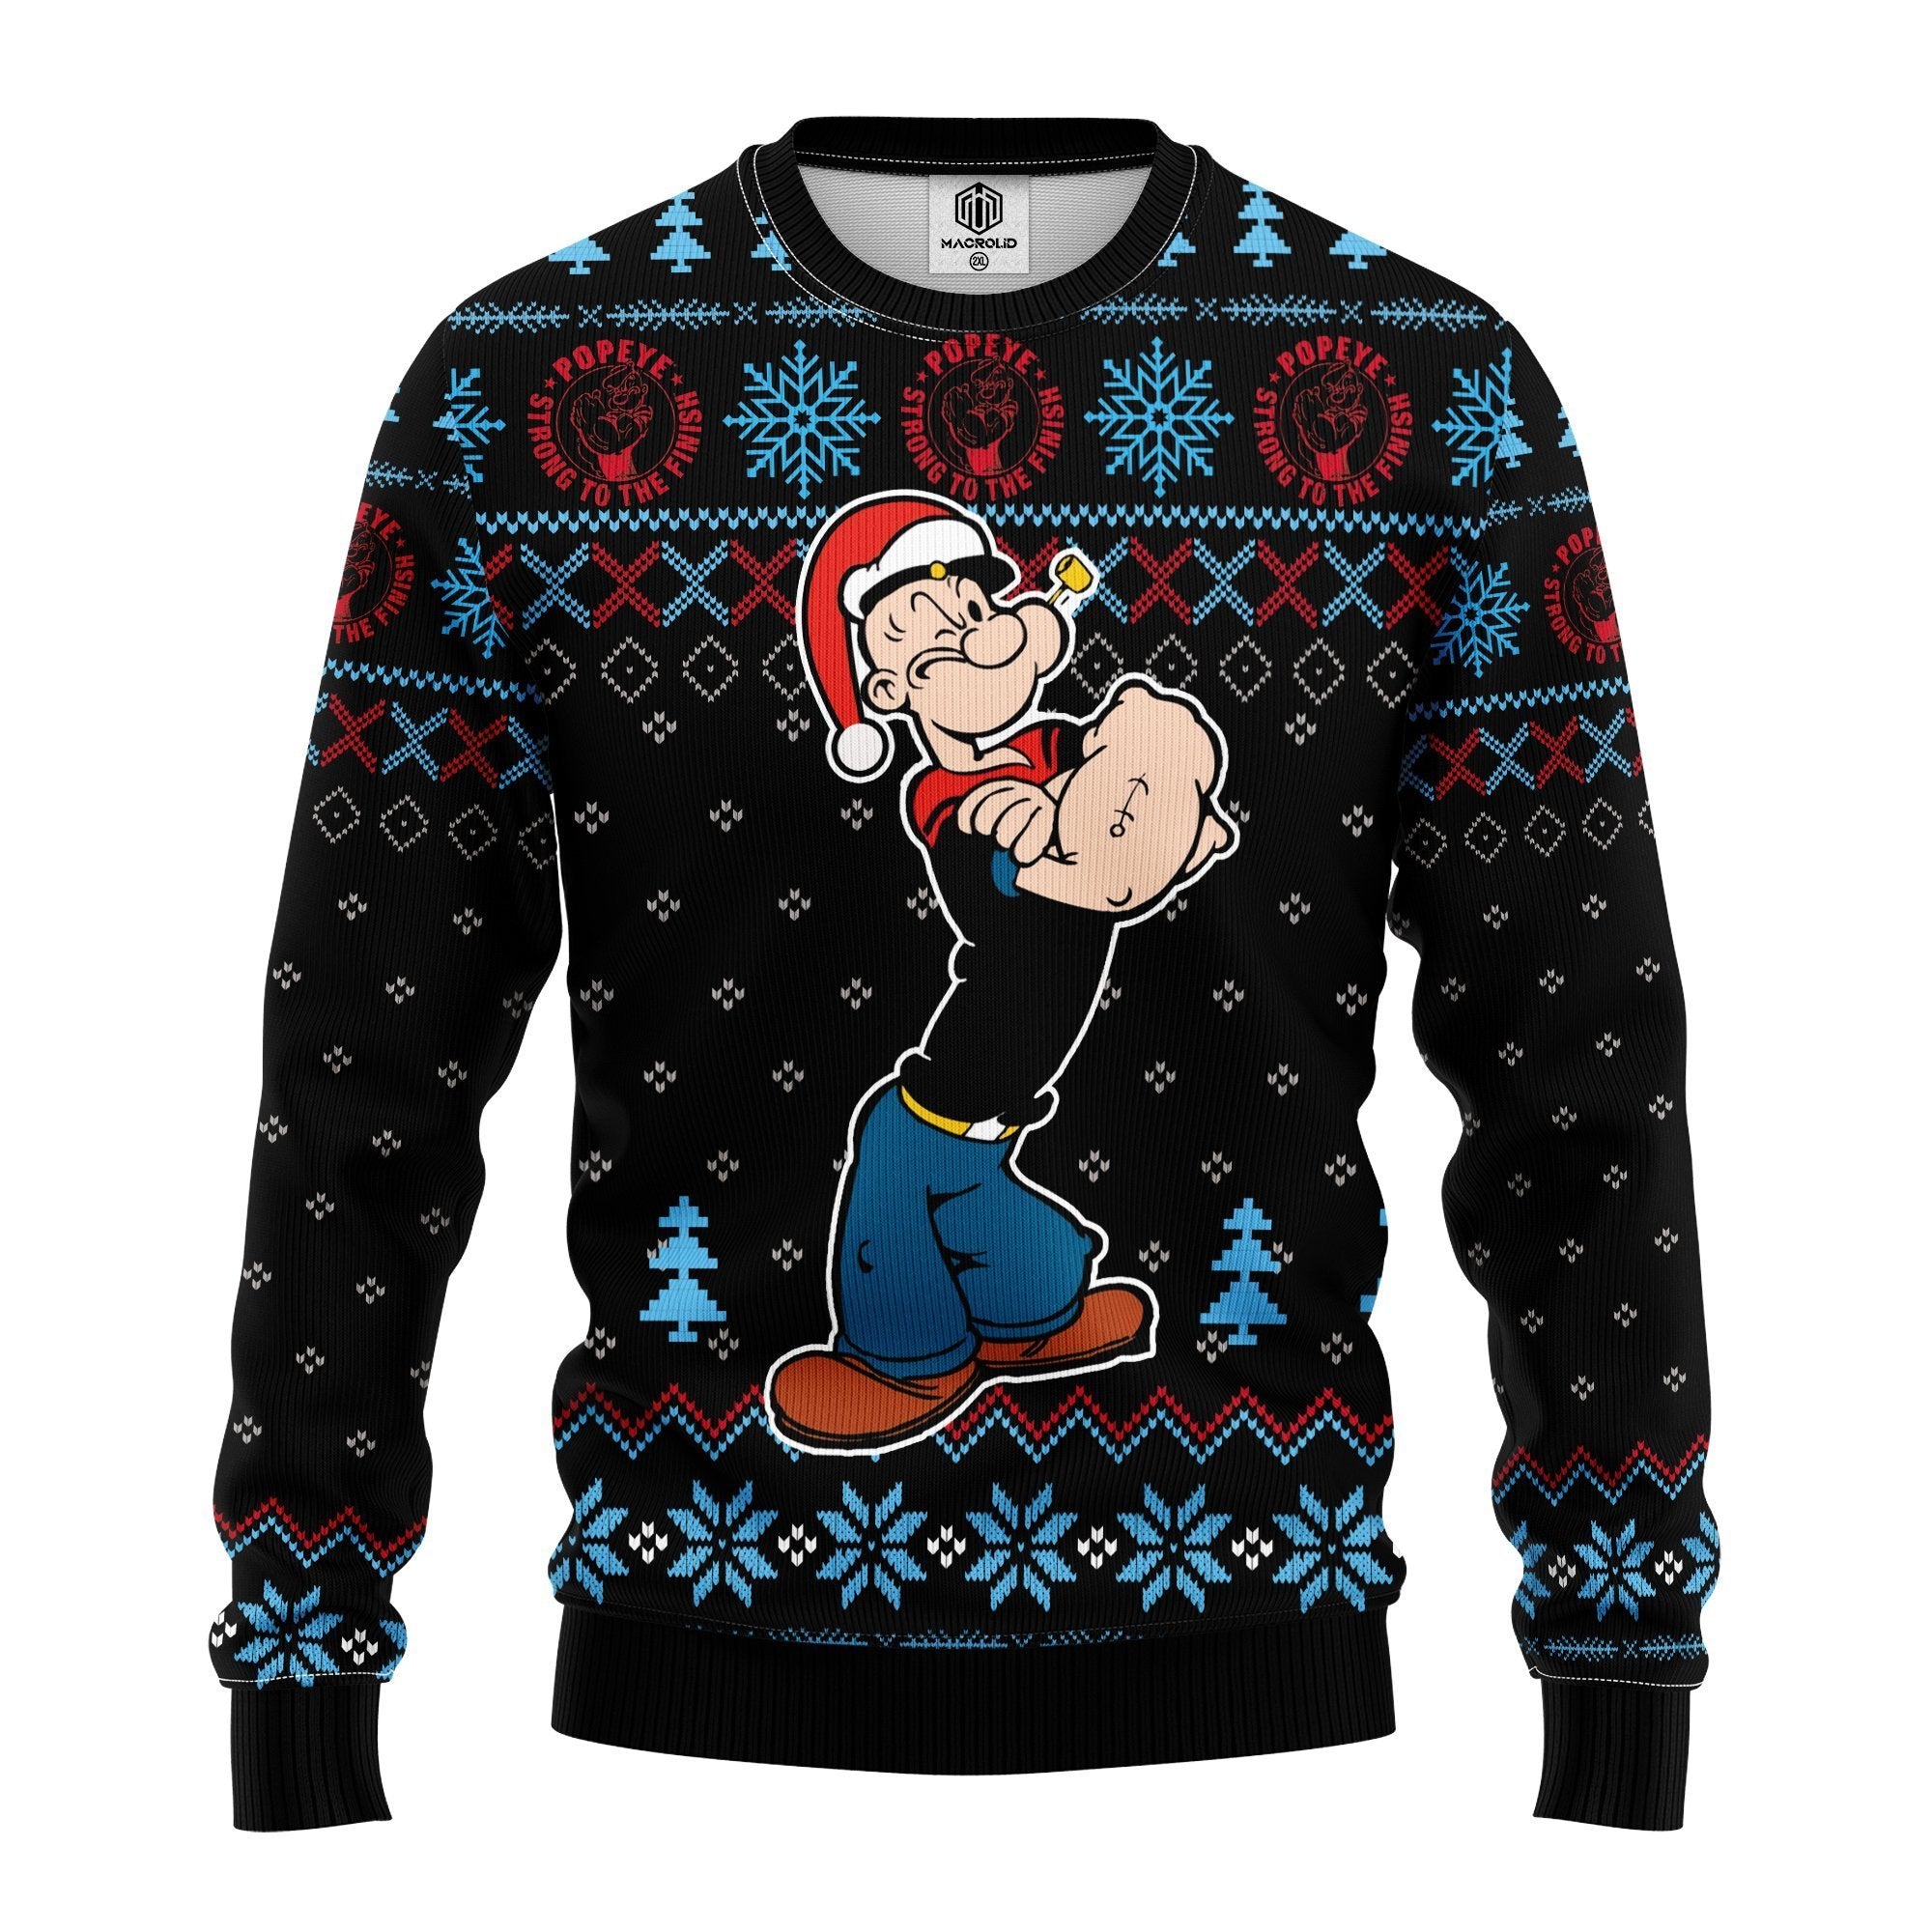 Popeye Strong Ugly Christmas Sweater Amazing Gift Idea Thanksgiving Gift